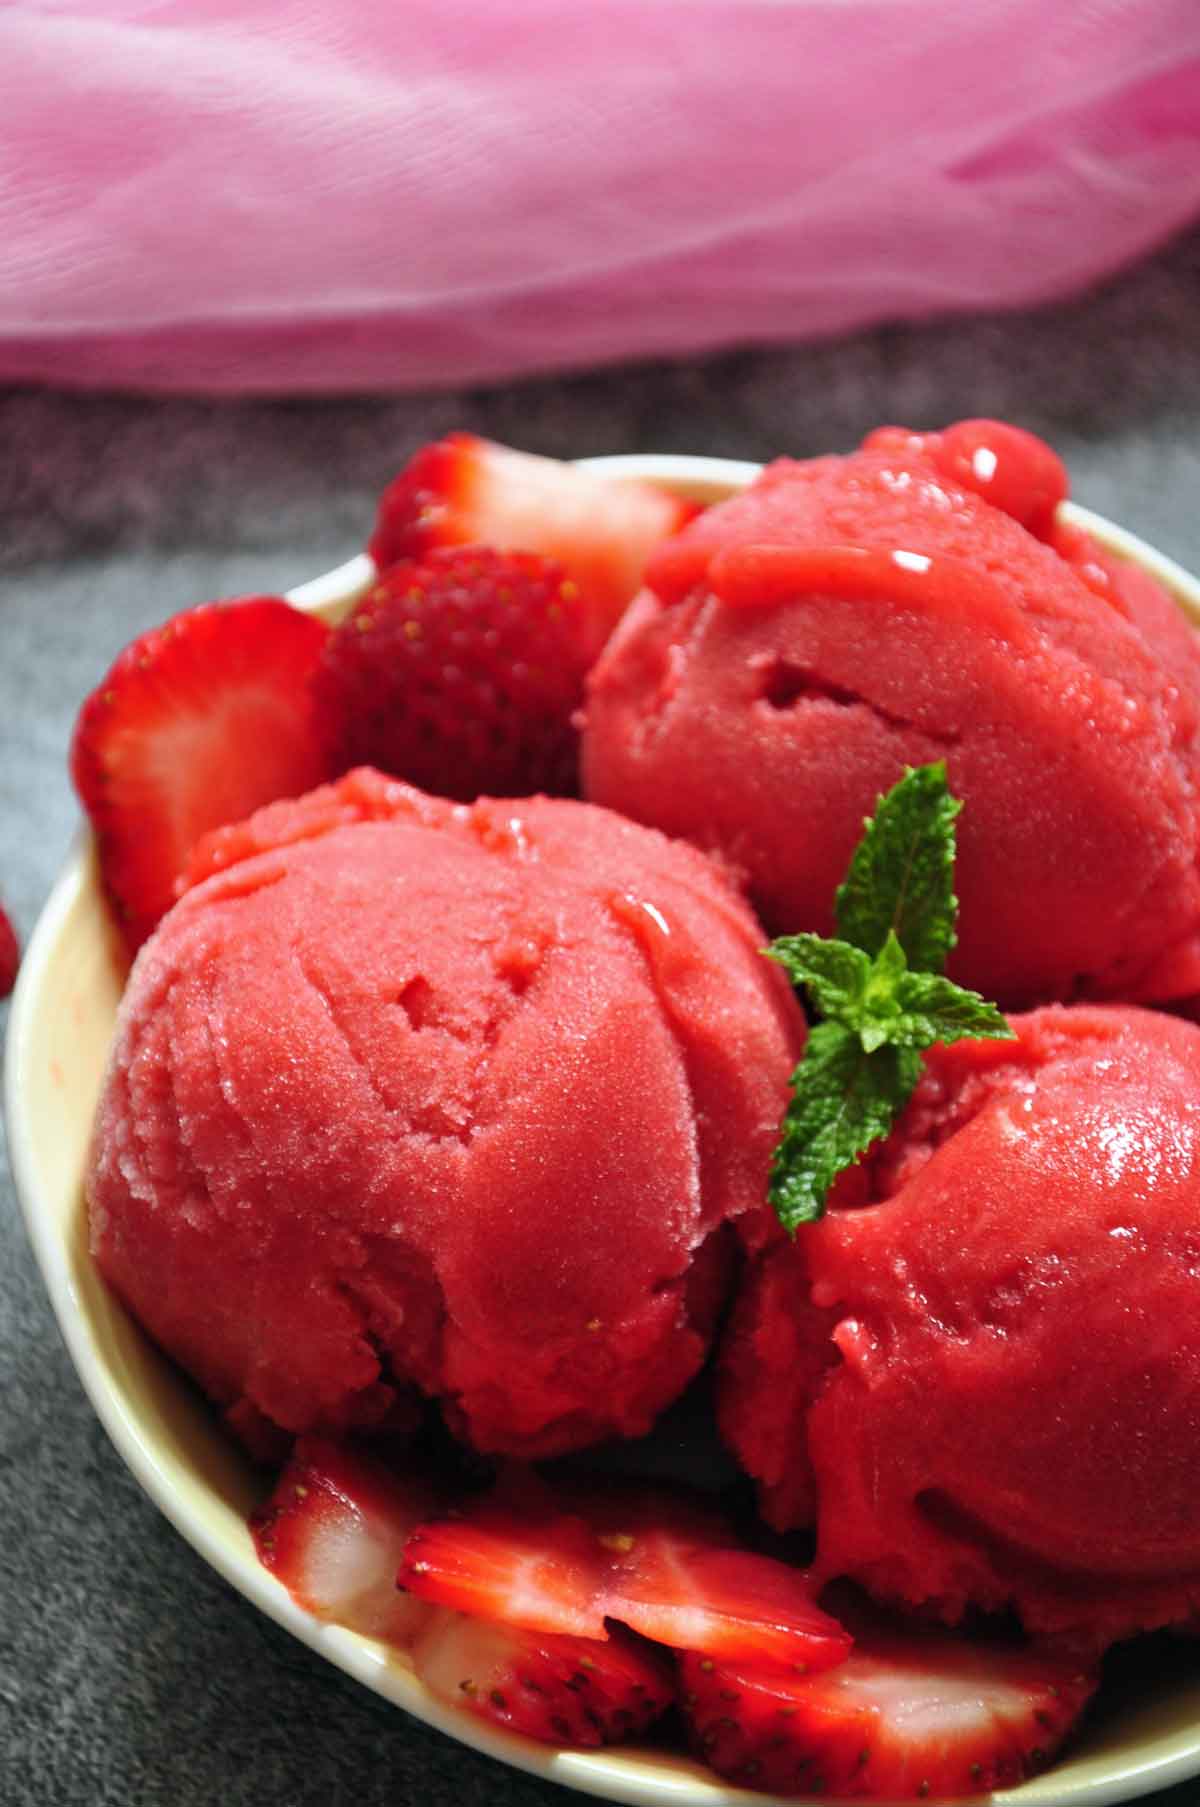 strawberry sorbet scoops with sliced strawberries and mint leaves in a fruit bowl.